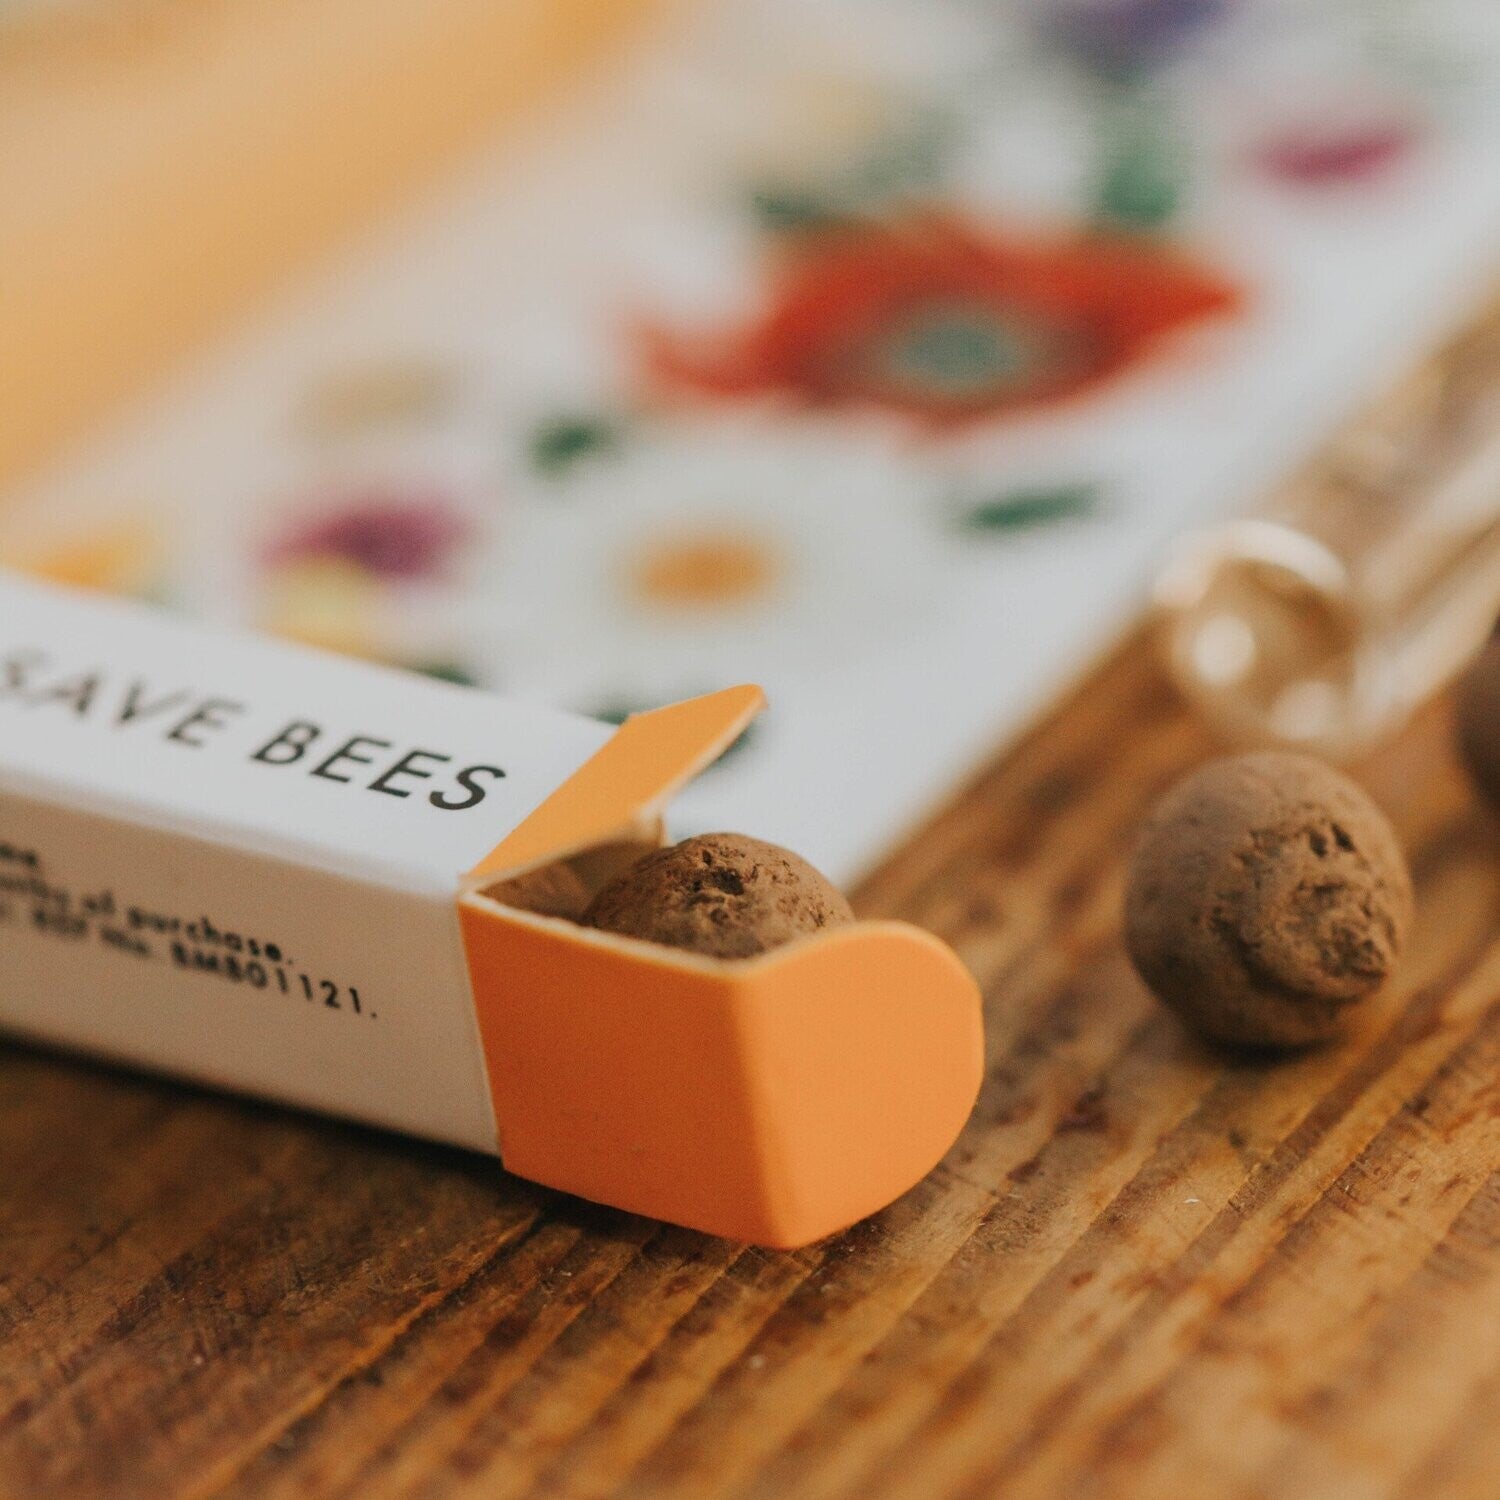 close up of the packaging showing where the seedballs are stored